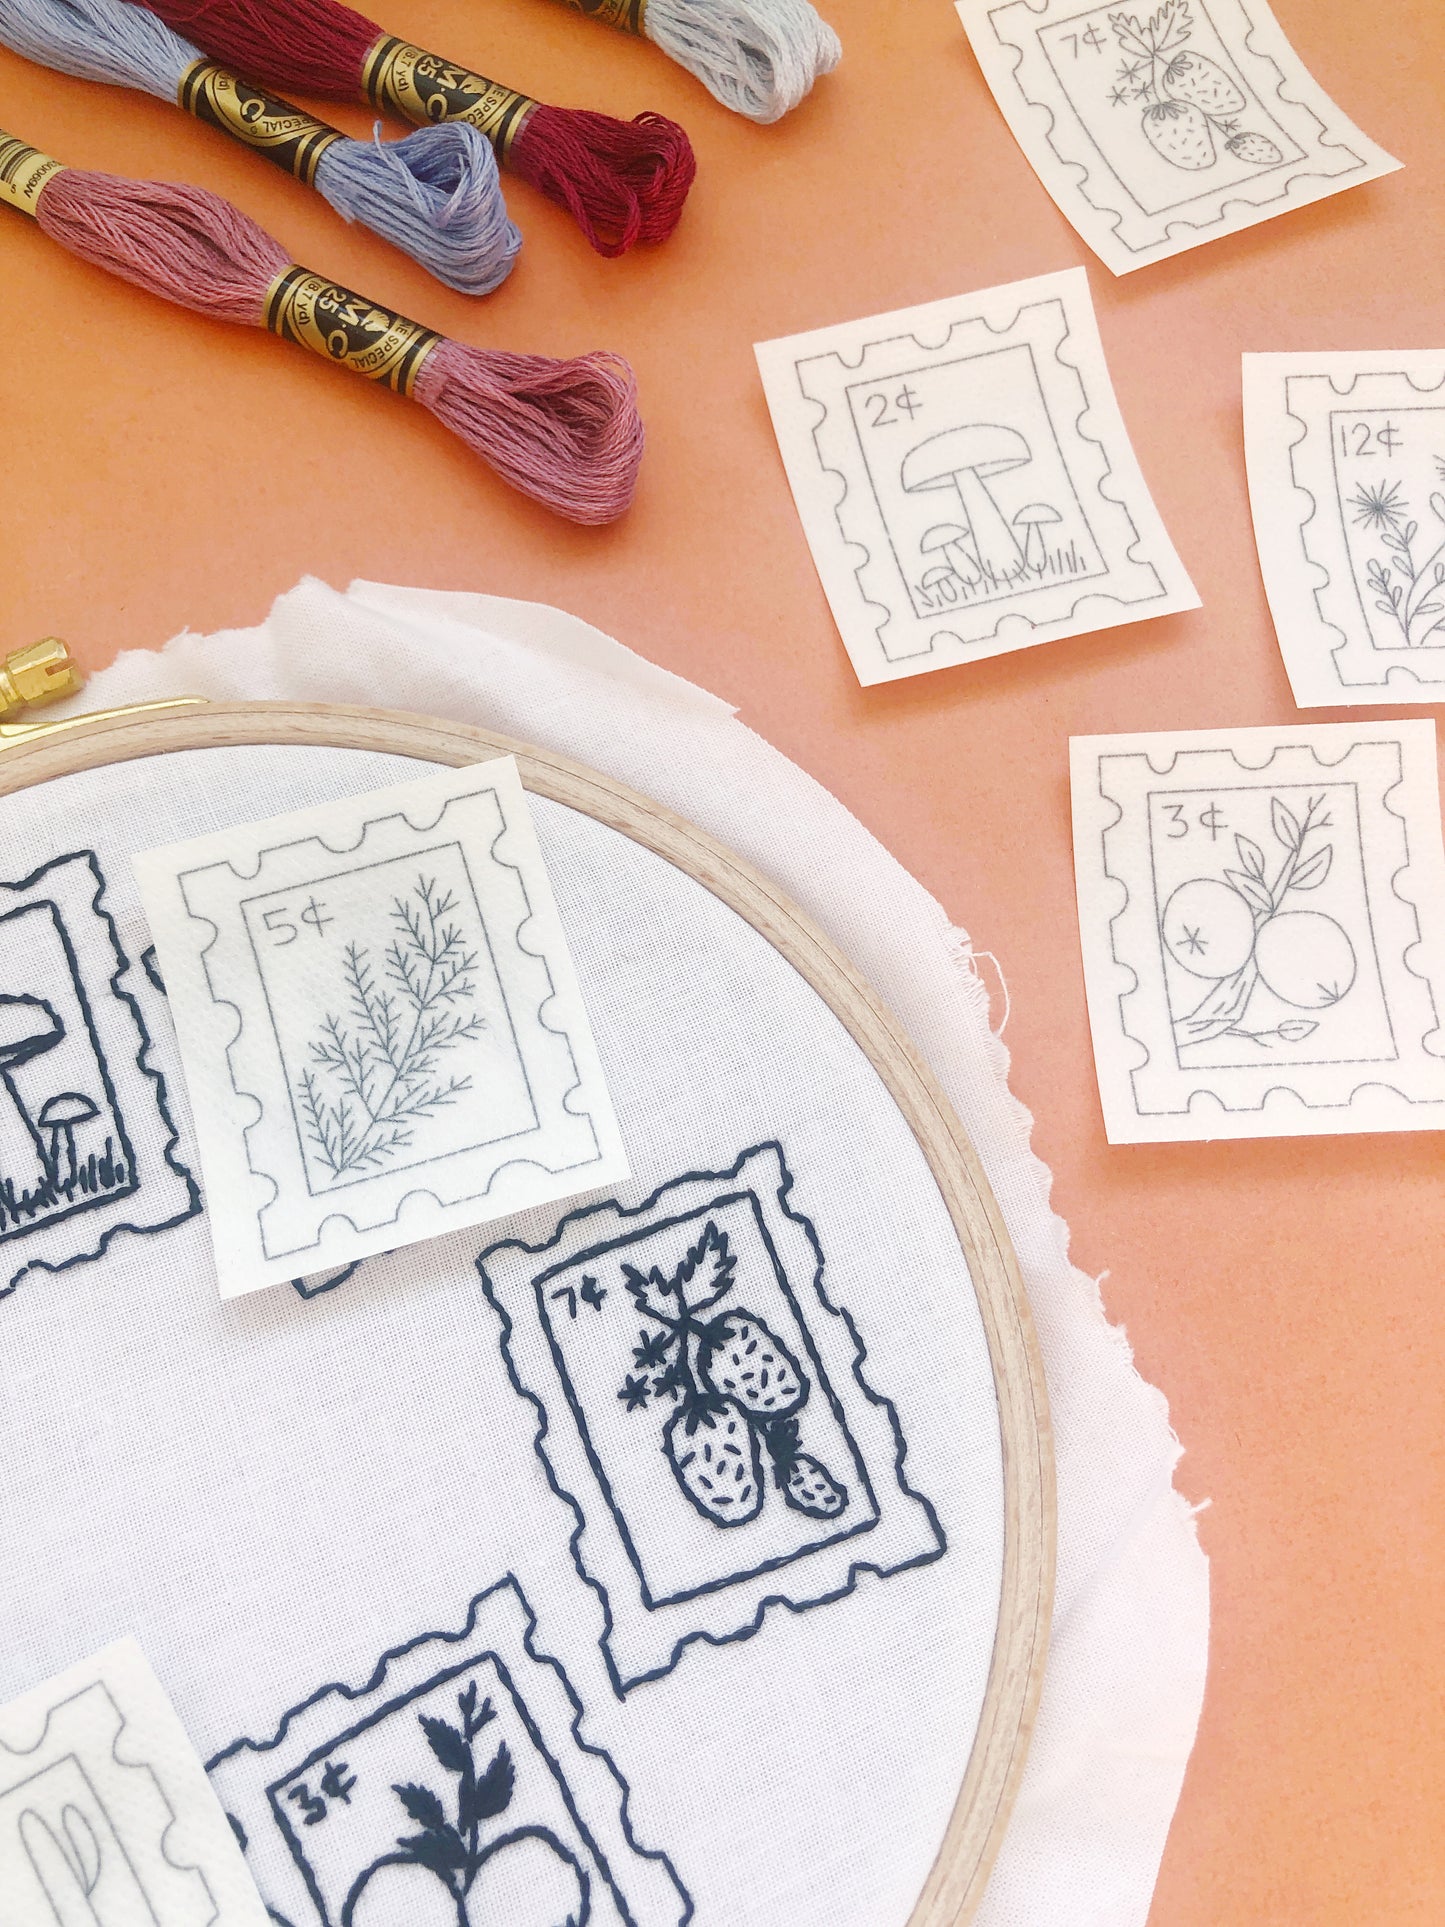 Botanical Stamps - Peel Stick and Stitch Hand Embroidery Patterns